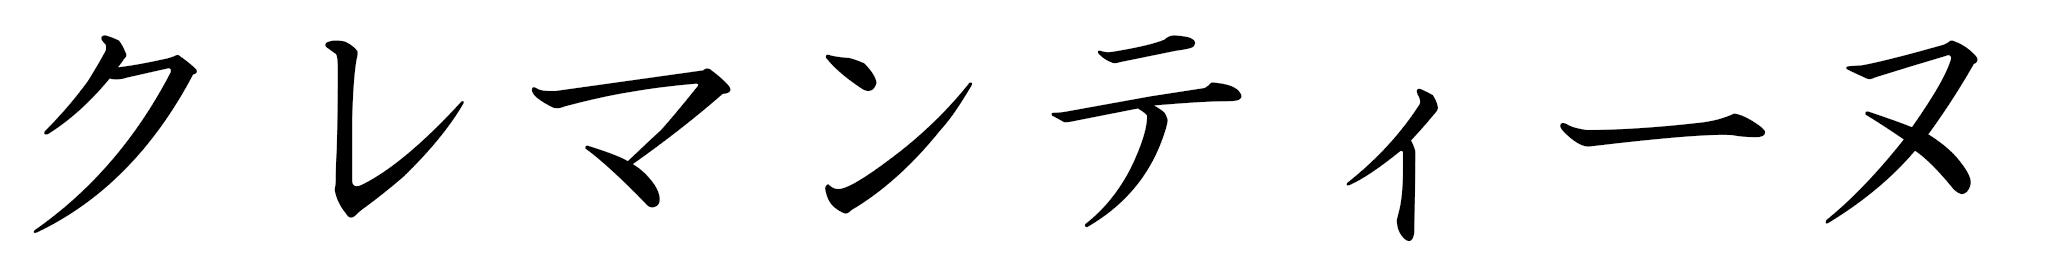 Clémentine in Japanese